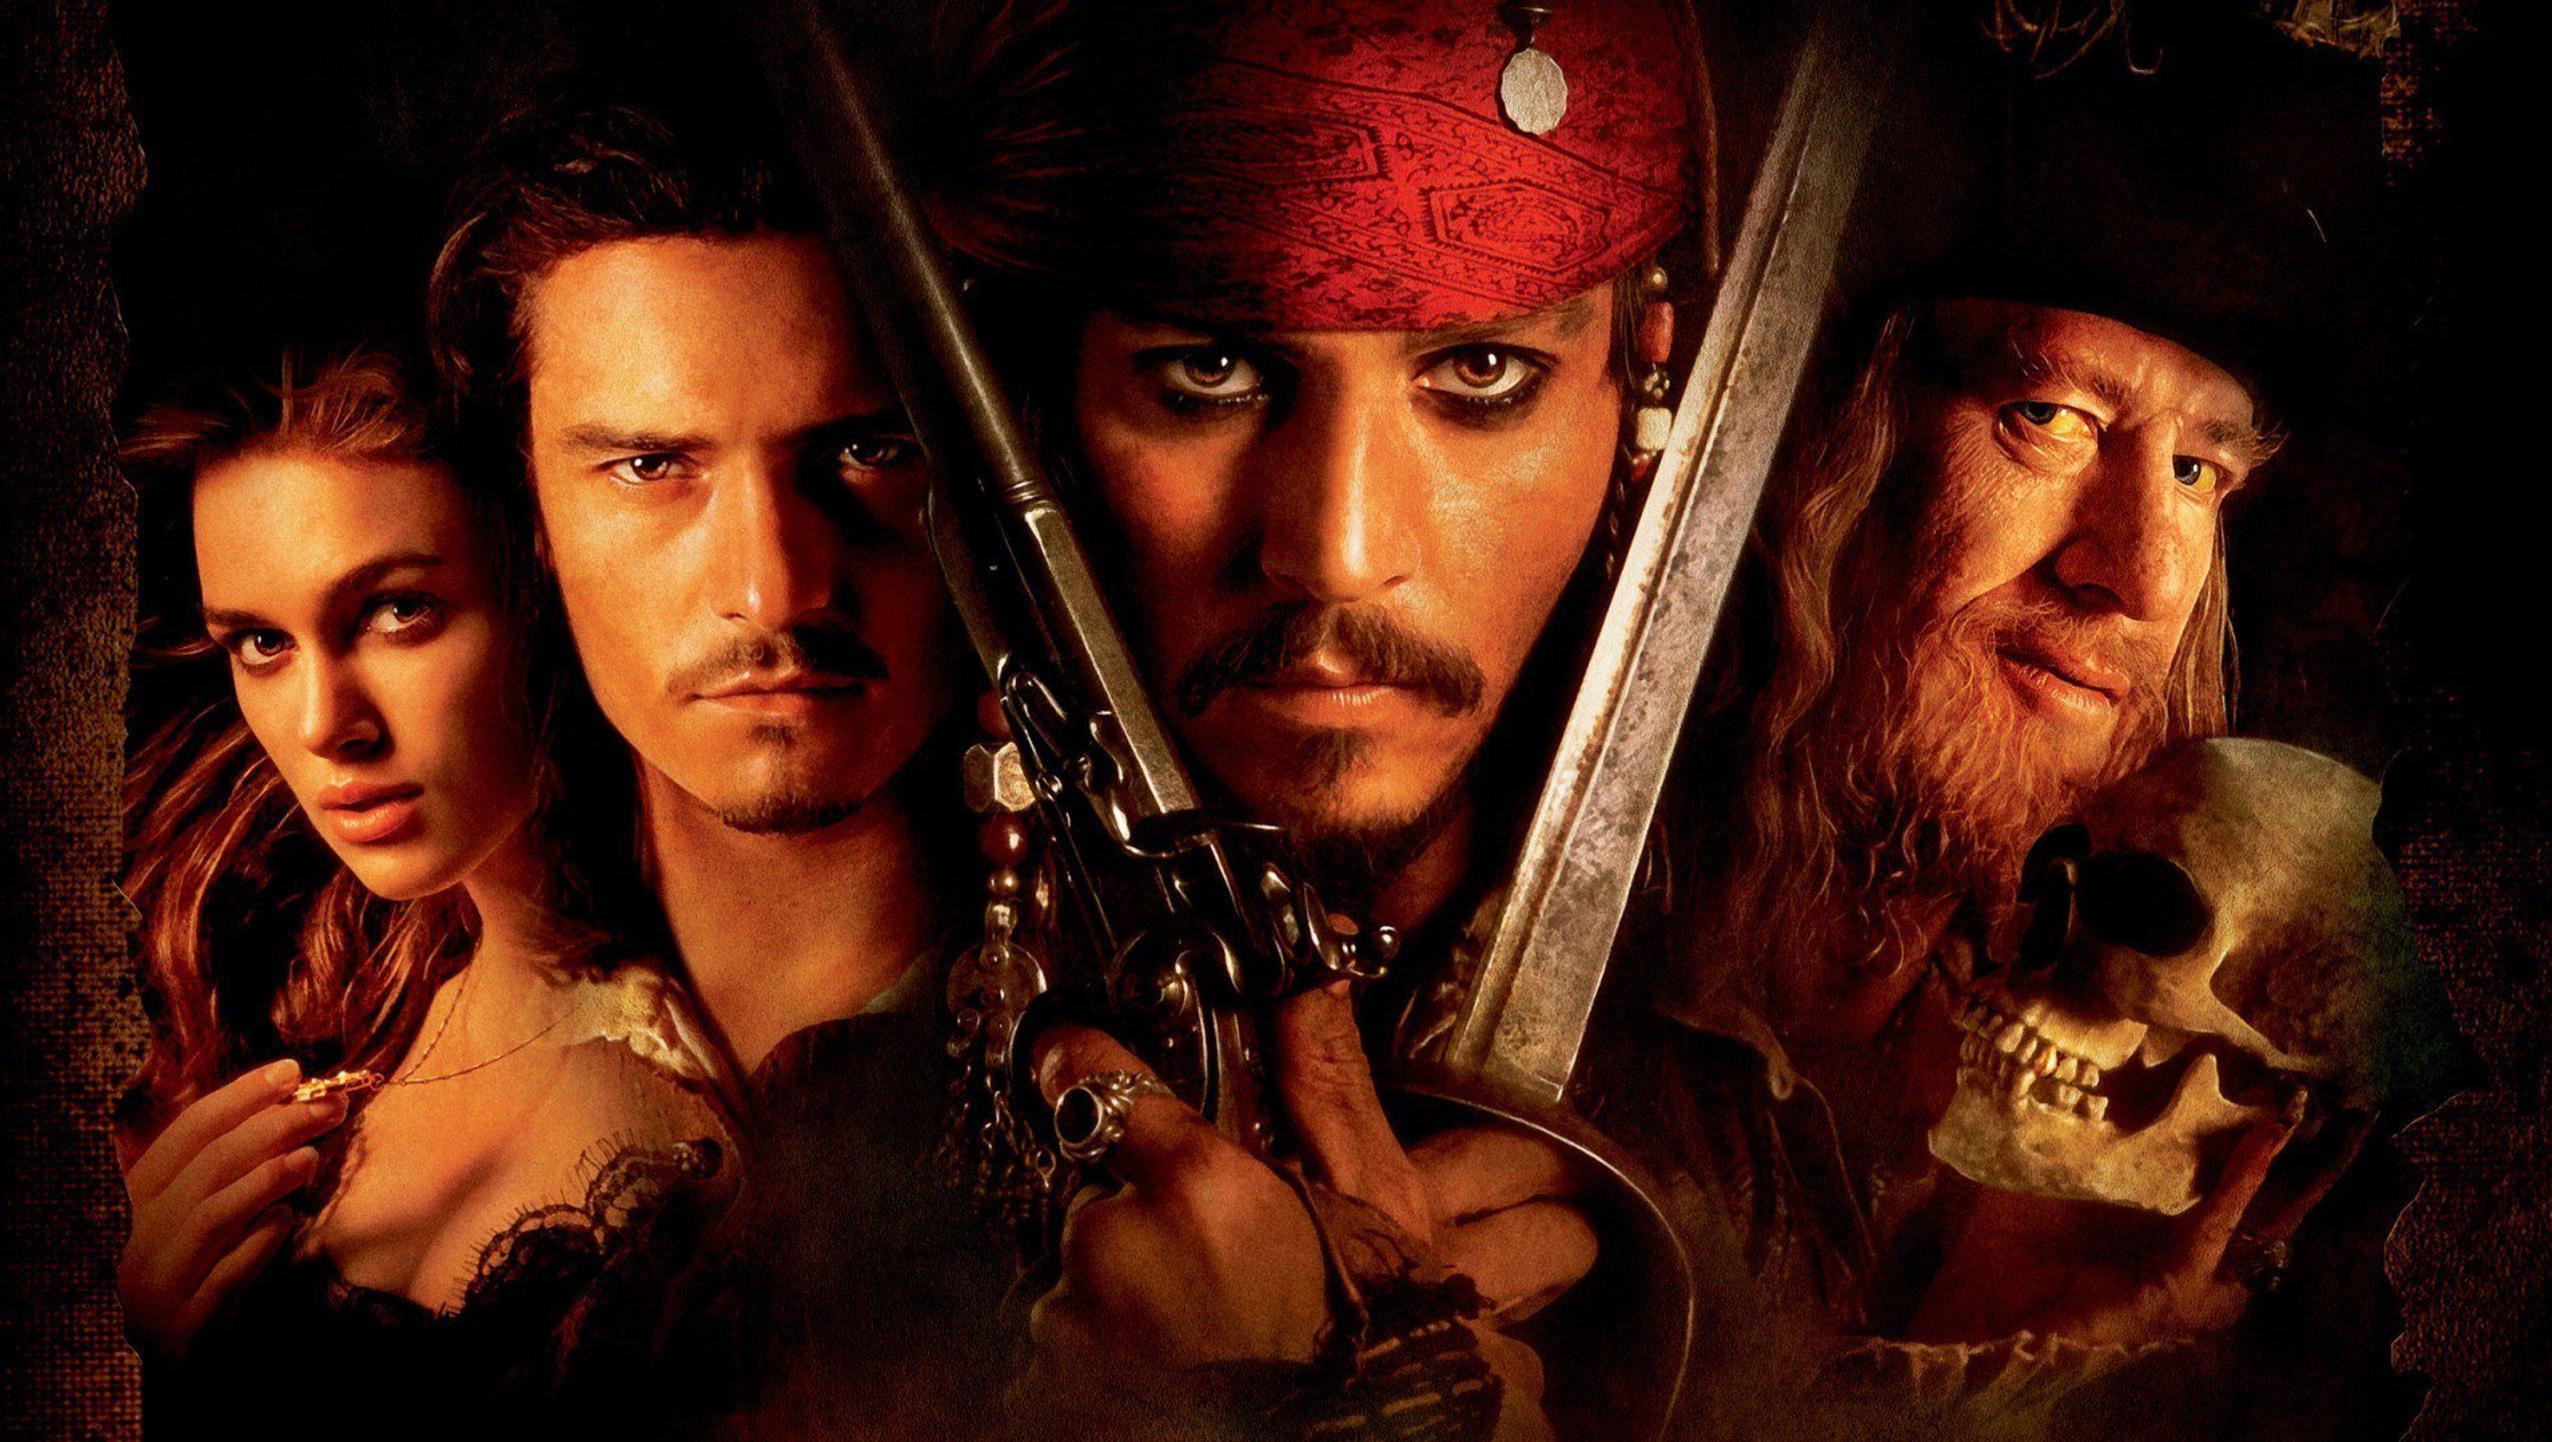 Pirates of the Caribbean: The Curse of the Black Pearl Wallpaper Free Pirates of the Caribbean: The Curse of the Black Pearl Background